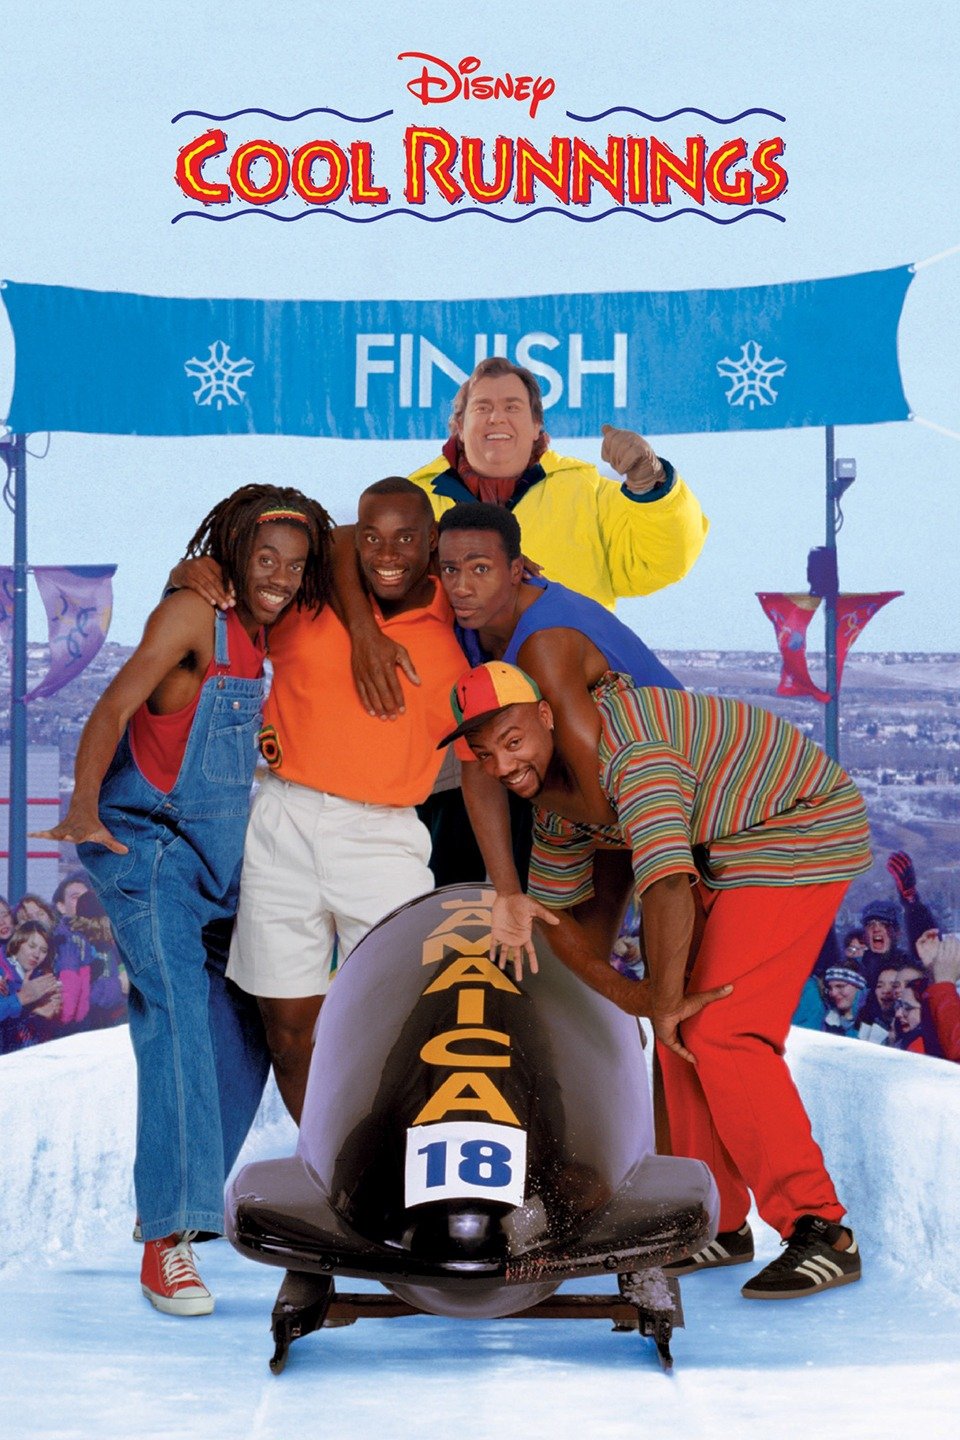 Cool Runnings movie Disney - movies for sports lovers